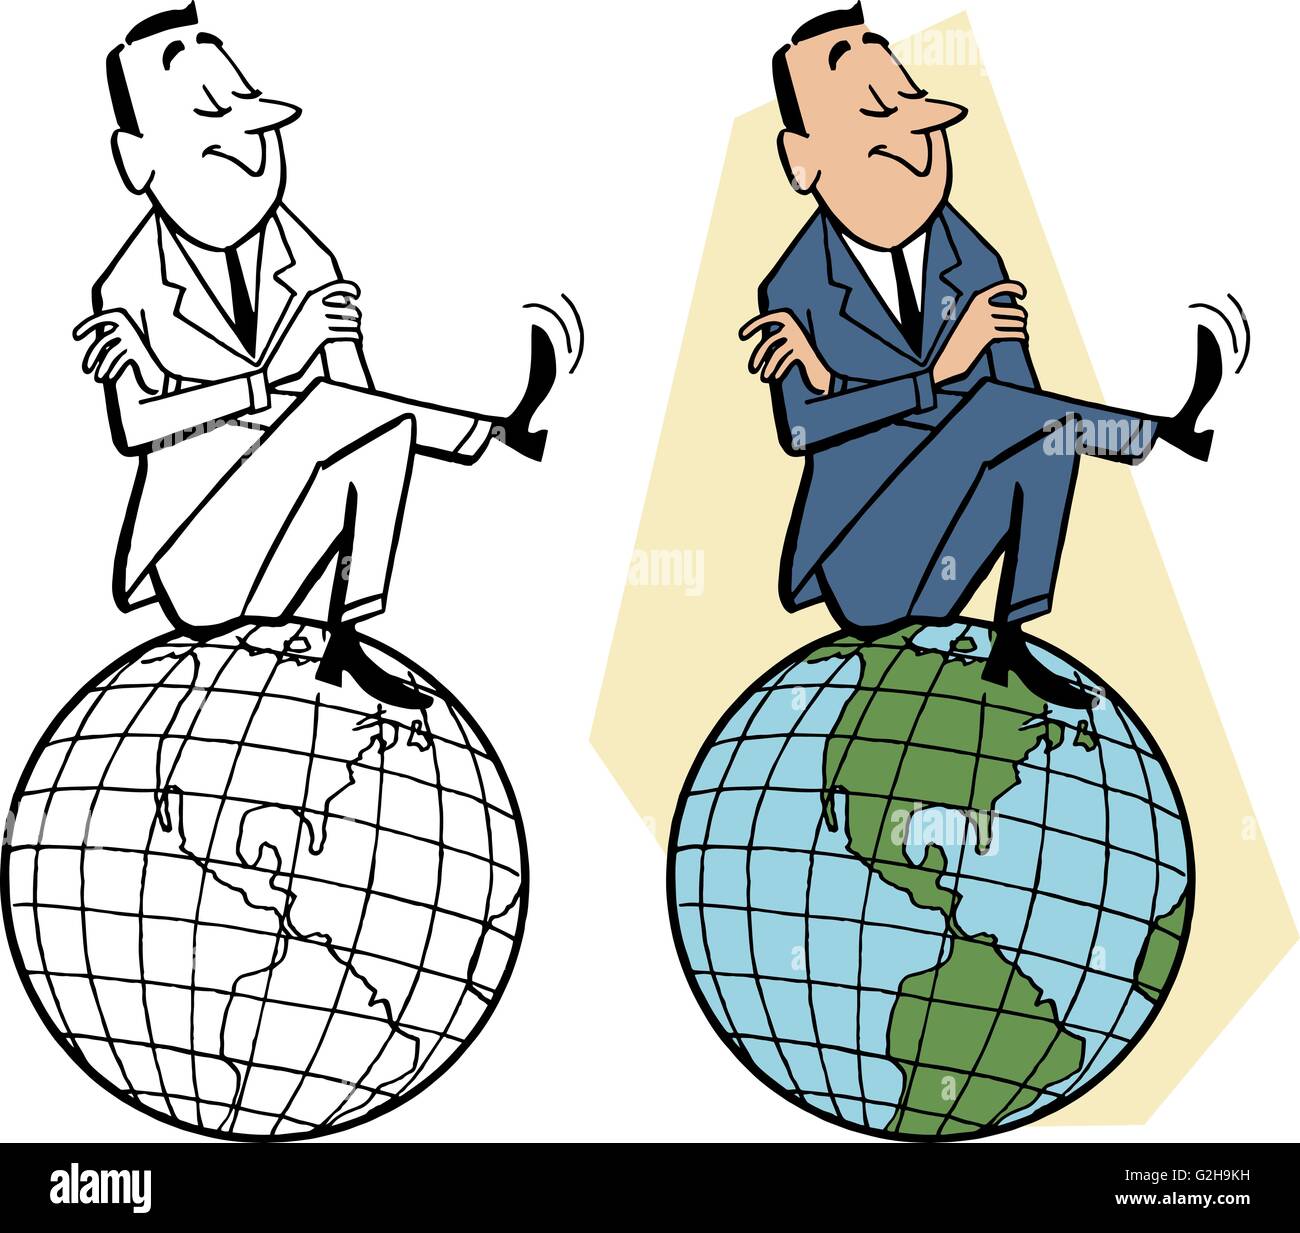 Man sitting on top of the world Stock Vector